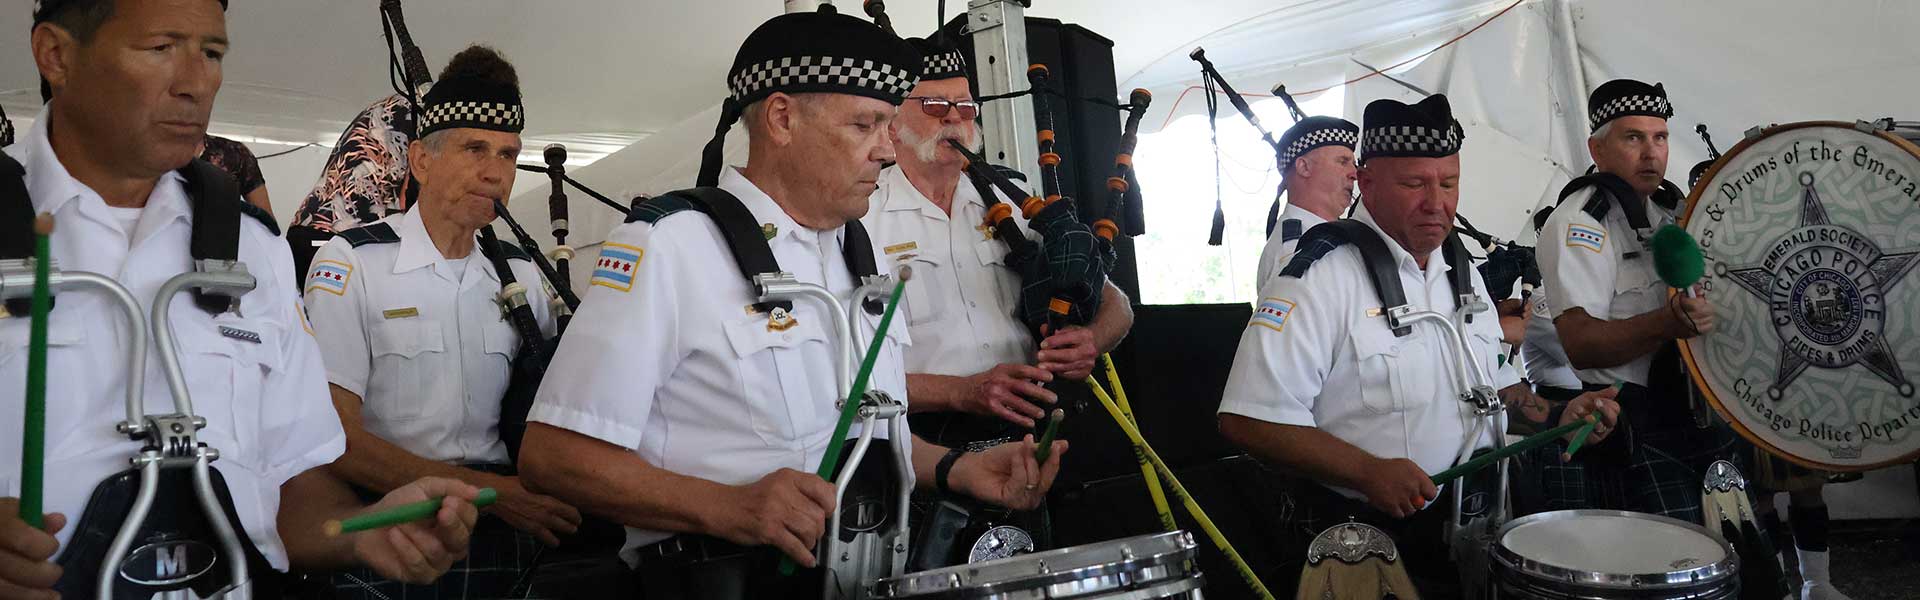 Bagpipes and Drums of the Emerald Society playing at Gaelic Park Irish Fest